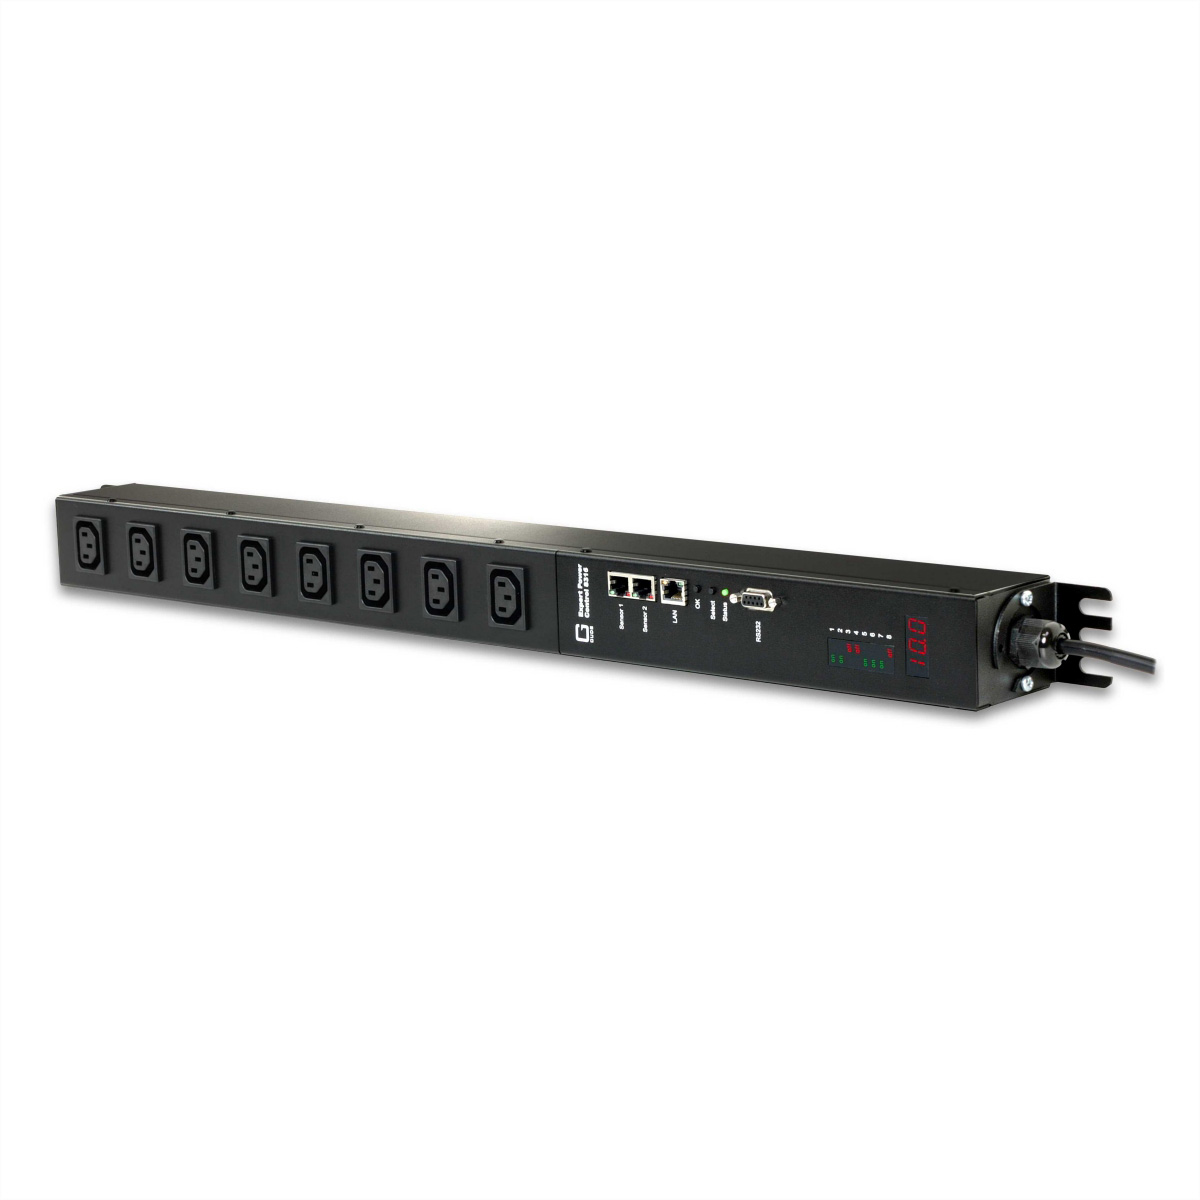 GUDE 8314-2 EPC 8xC13 switched PDU mit Energiemessung pro Phase